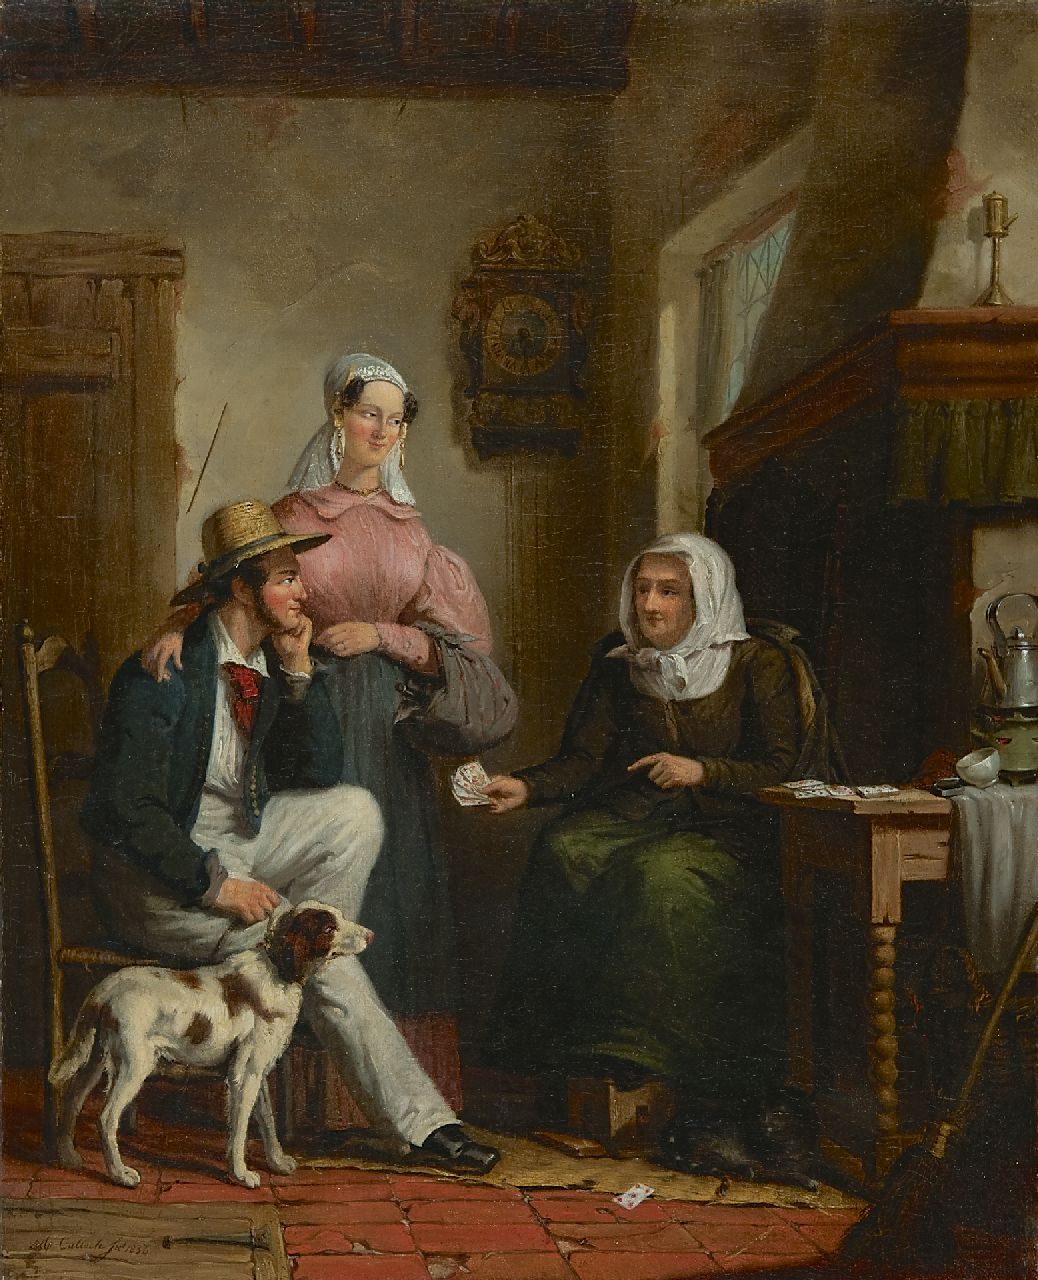 Calisch M.  | Moritz Calisch, The fortune teller, oil on canvas 53.3 x 43.5 cm, signed l.l. and dated 1856